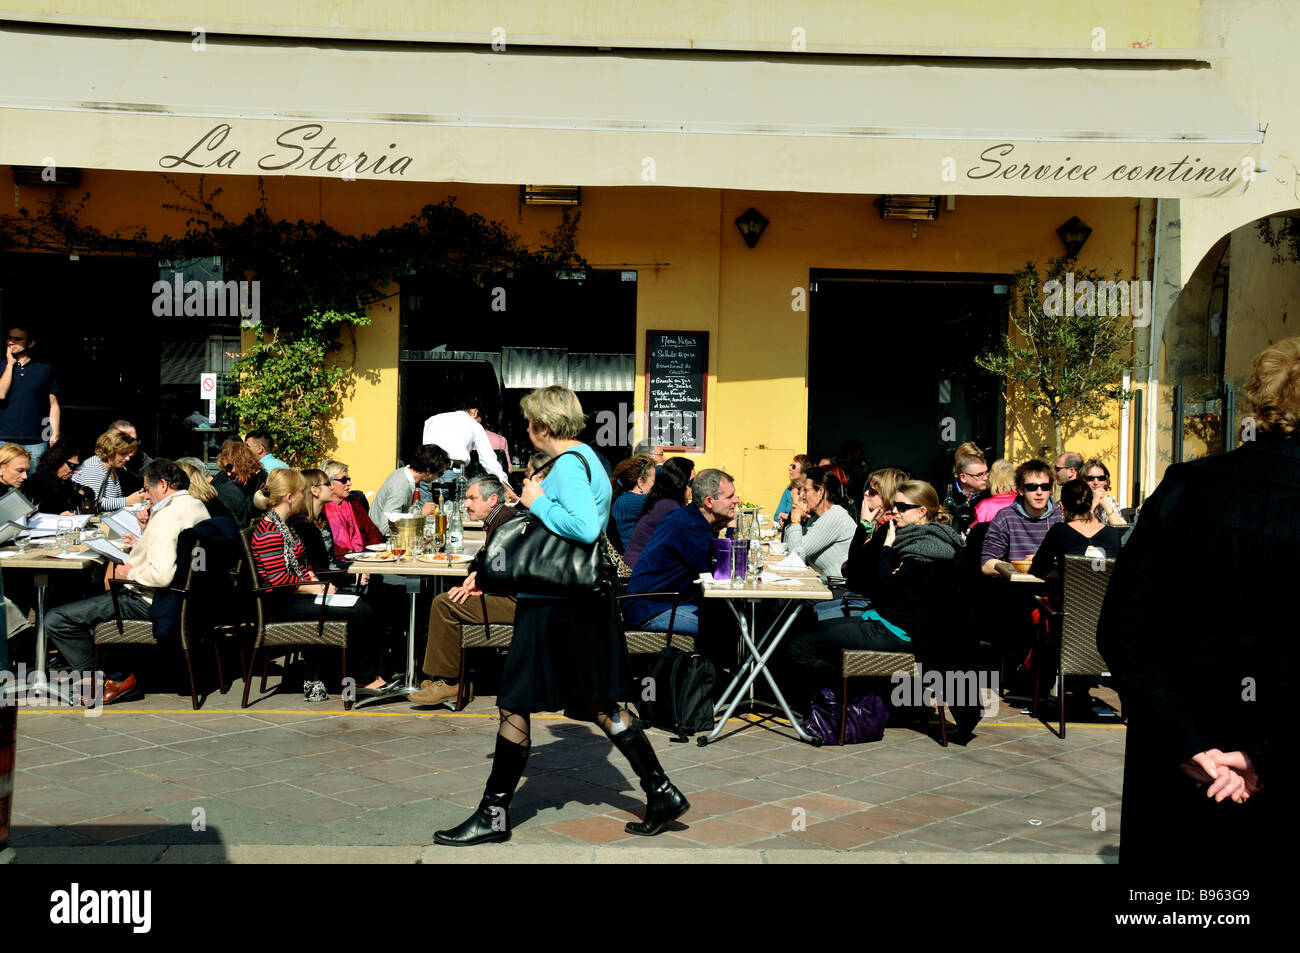 Nice, France, Front, Large Crowd People, French Brasserie Restaurant Sidewalk Crowded terrace outside on 'Cours Saleya' 'la Storia Pizzeria' tables Stock Photo